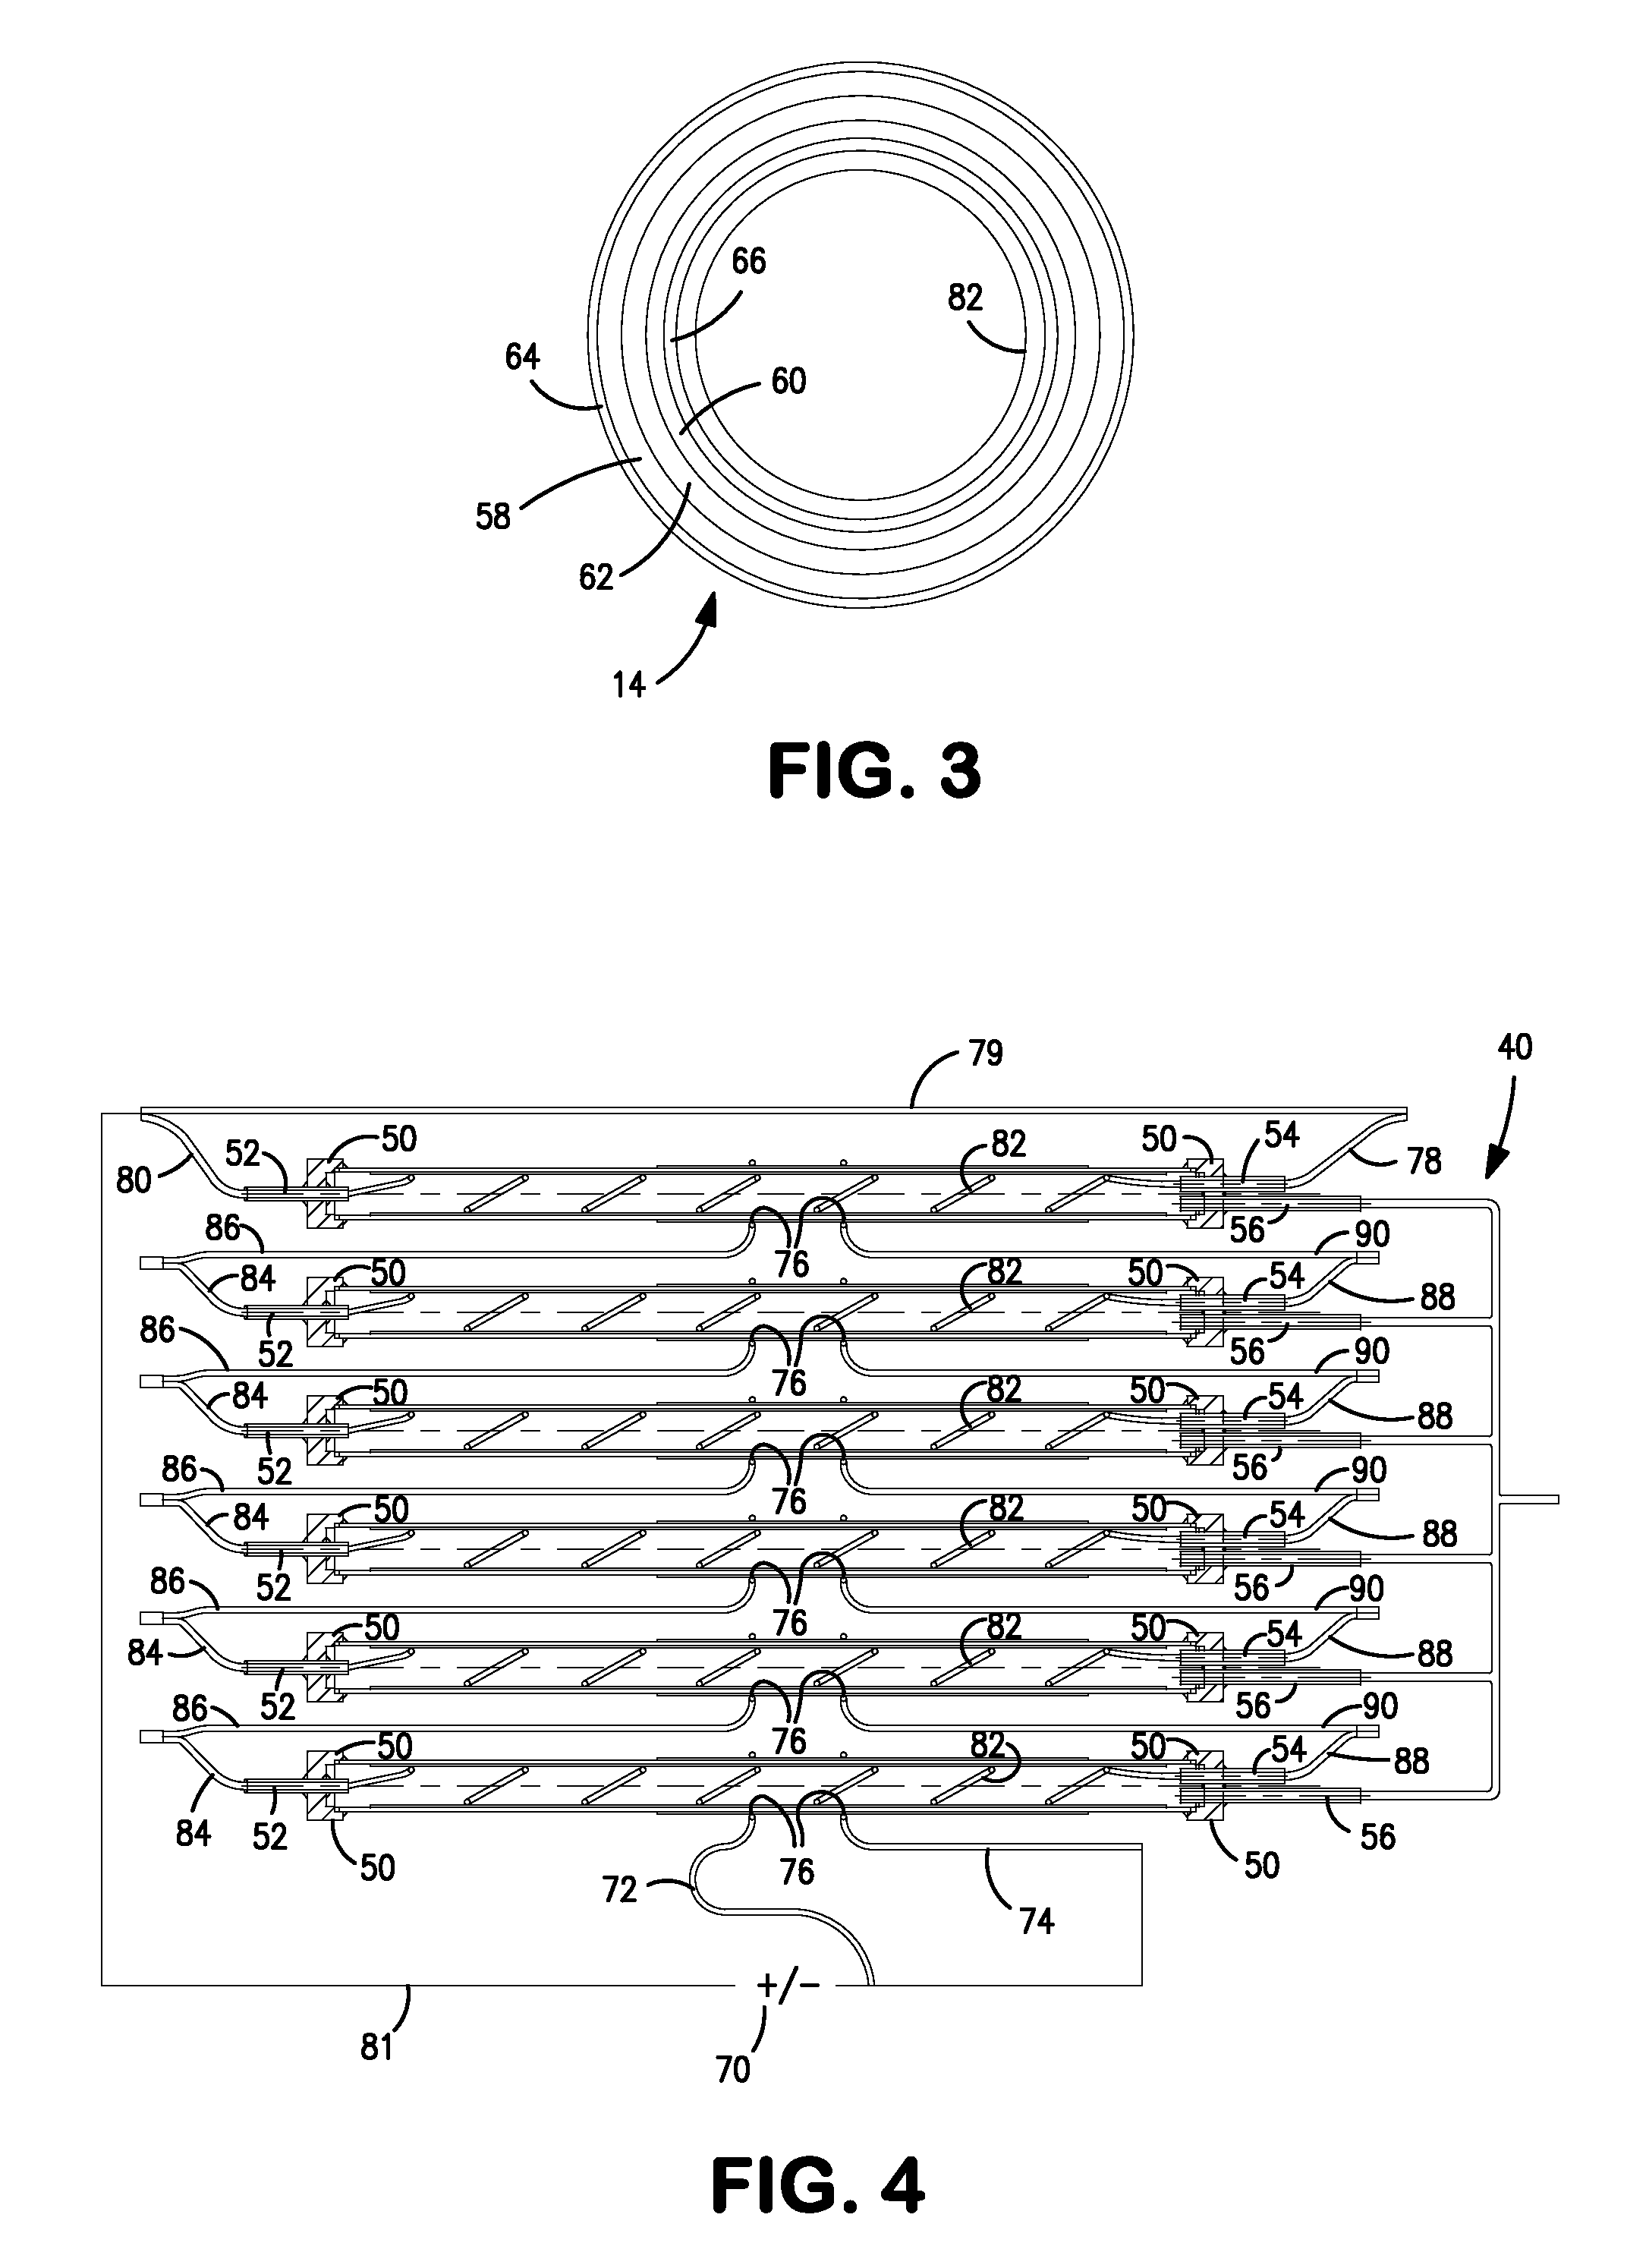 Oxygen separation assembly and method